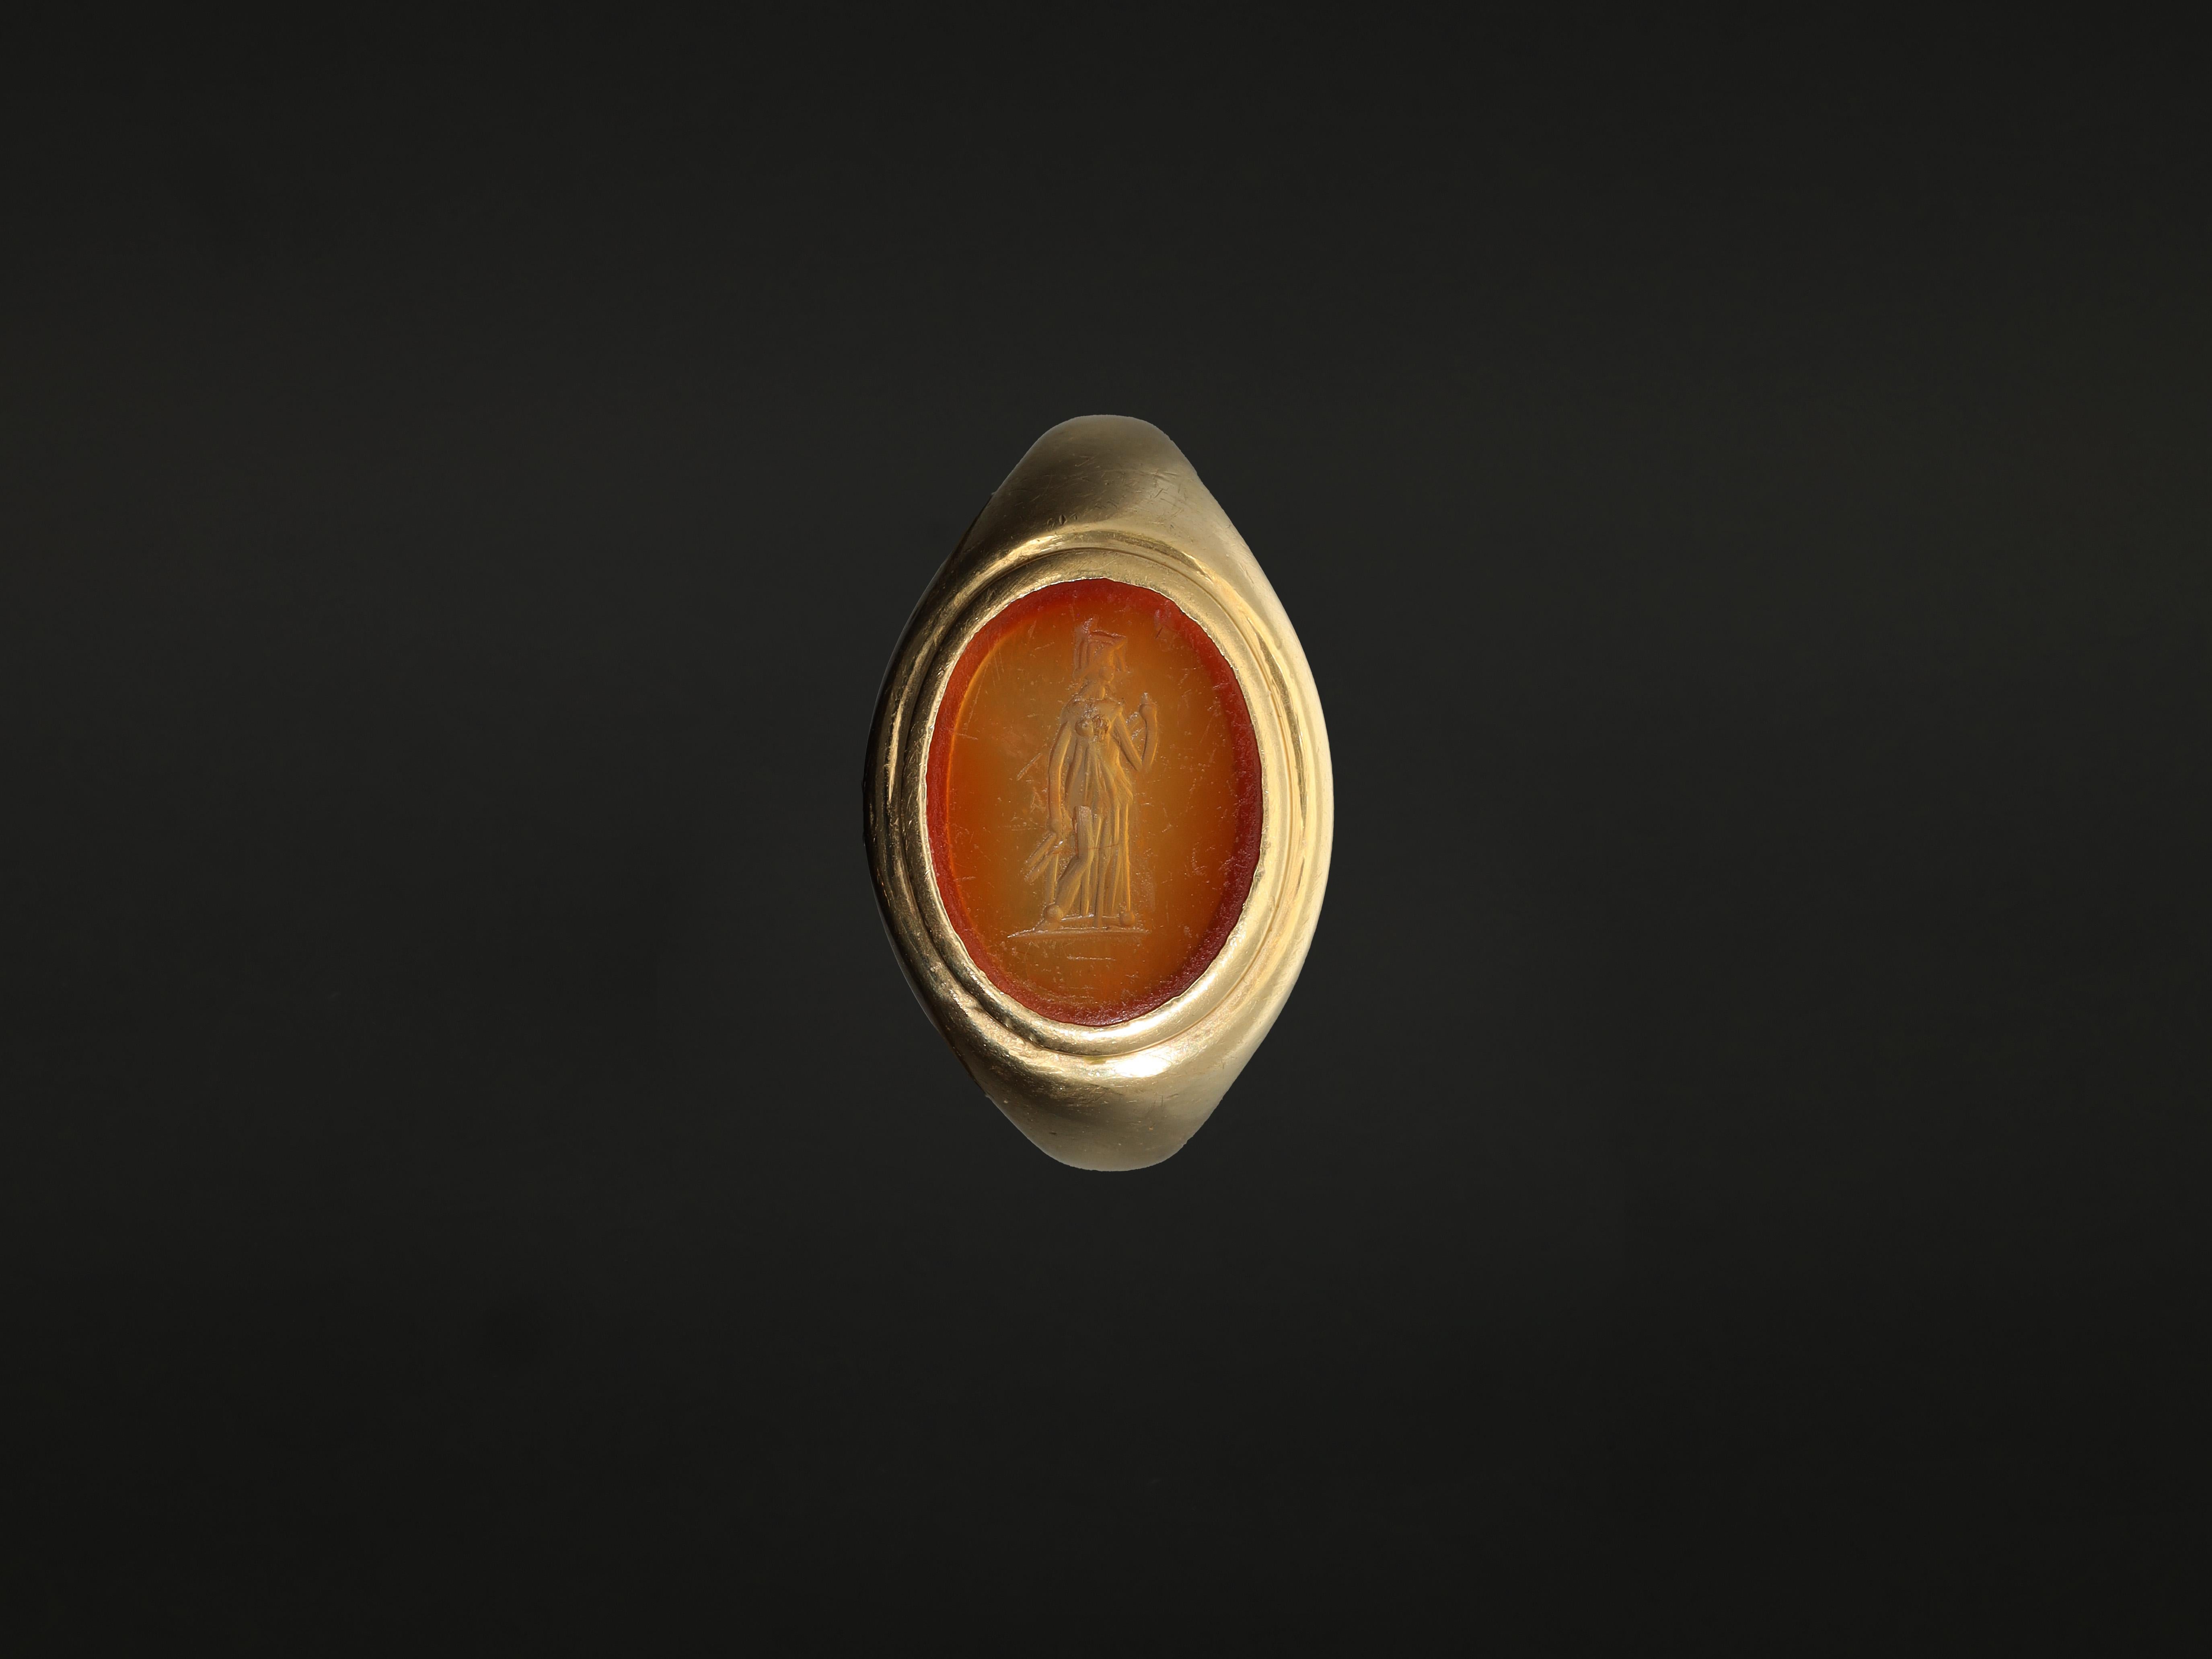 A chunky unisex signet ring with an orange agate intaglio. This very heavy - 13.4 grams - antique intaglio ring feels nice and substantial when worn. Set with an ancient carnelian (orange agate) oval intaglio, this ring is crafted in solid 18k